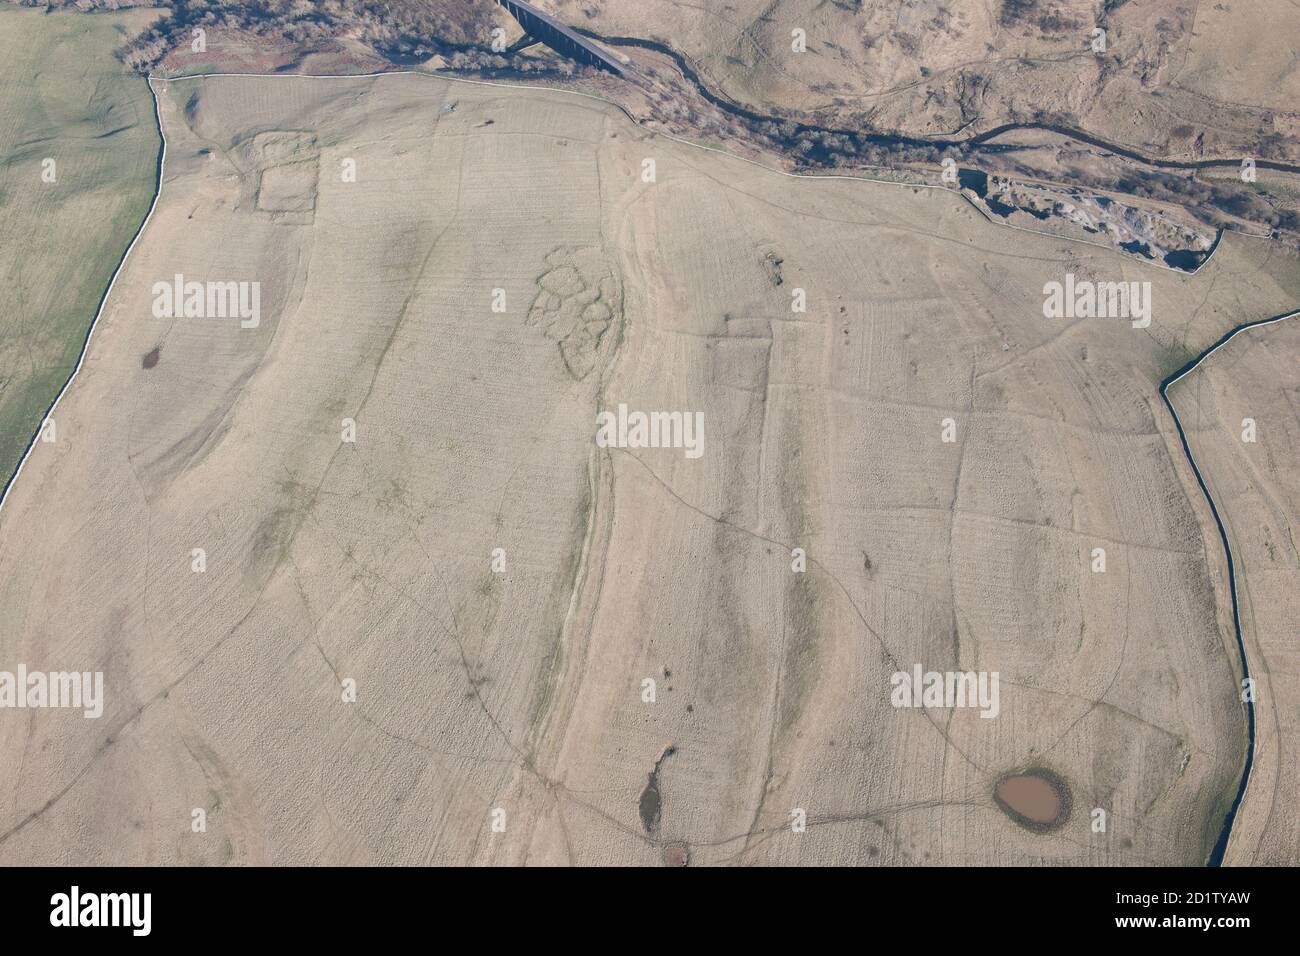 Two Romano British enclosed settlement earthwork and an aggregate field system at Intake, Crosby Garrett Fell, Cumbria, 2014, UK. Aerial view. Stock Photo